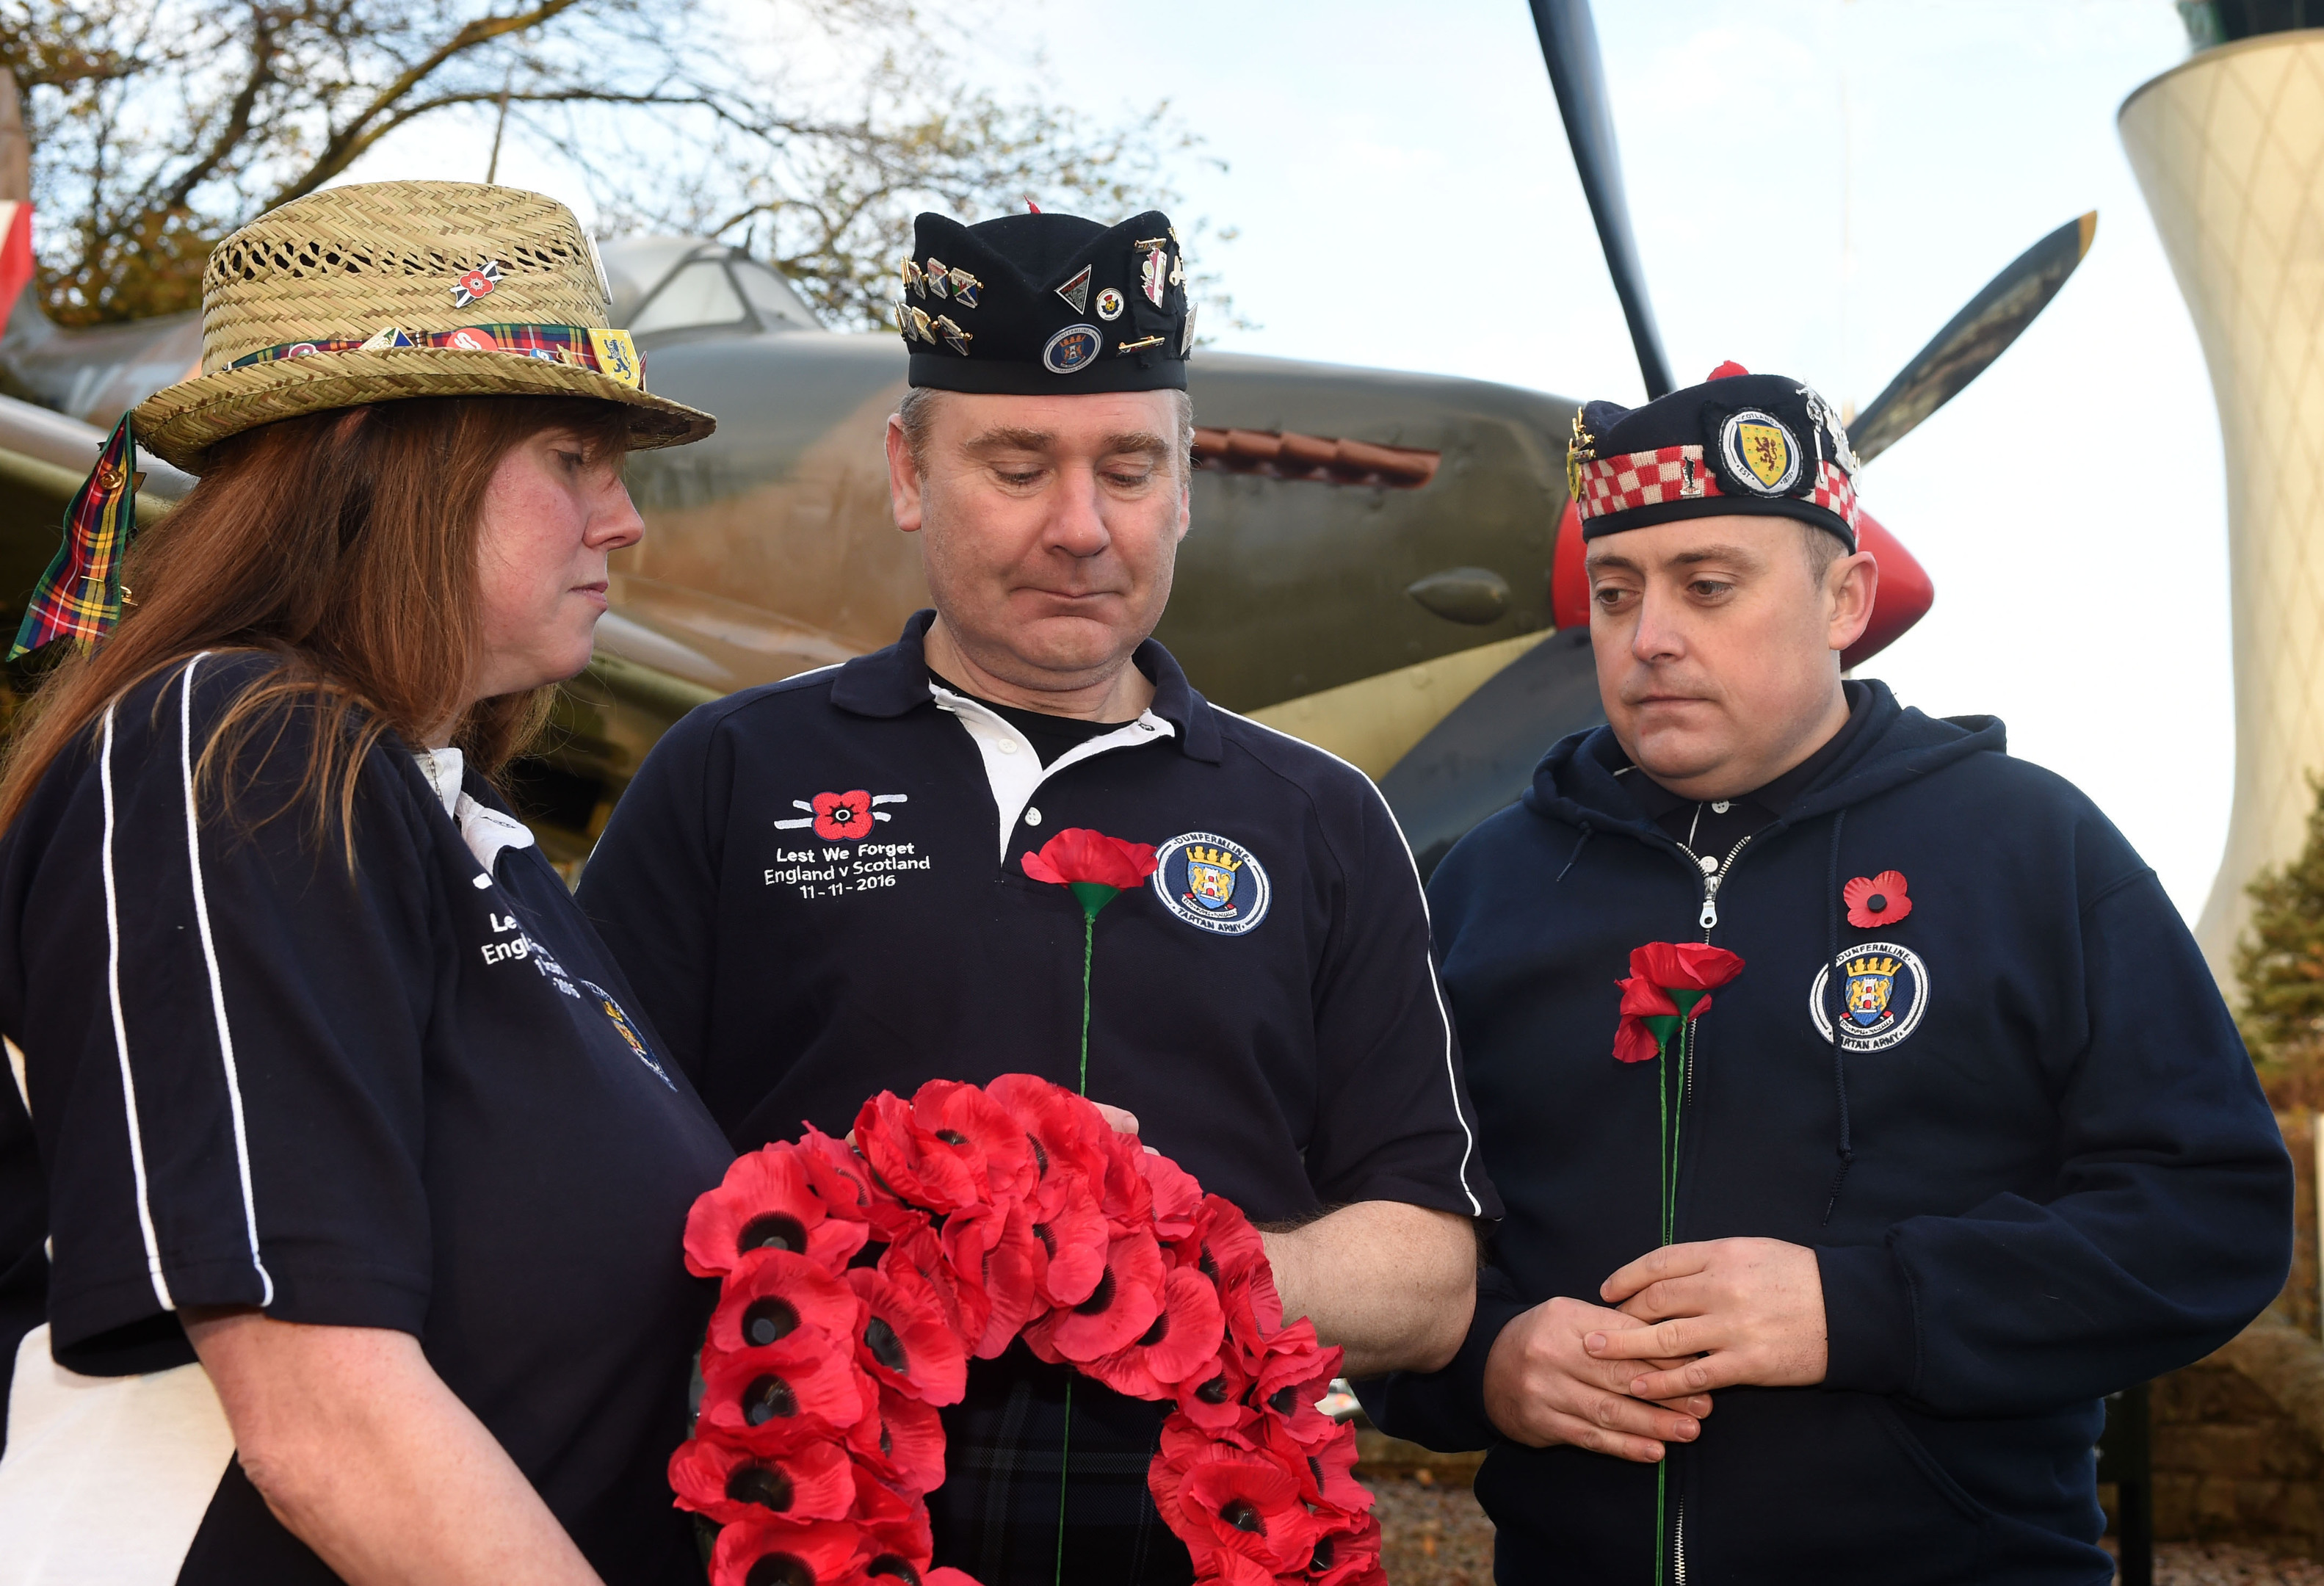 Members of the Tartan Army Jim and Audrey Ford, accompanied by Steven Avril pay their respects at the site of a WW 2 Spitfire at Edinburgh Airport.